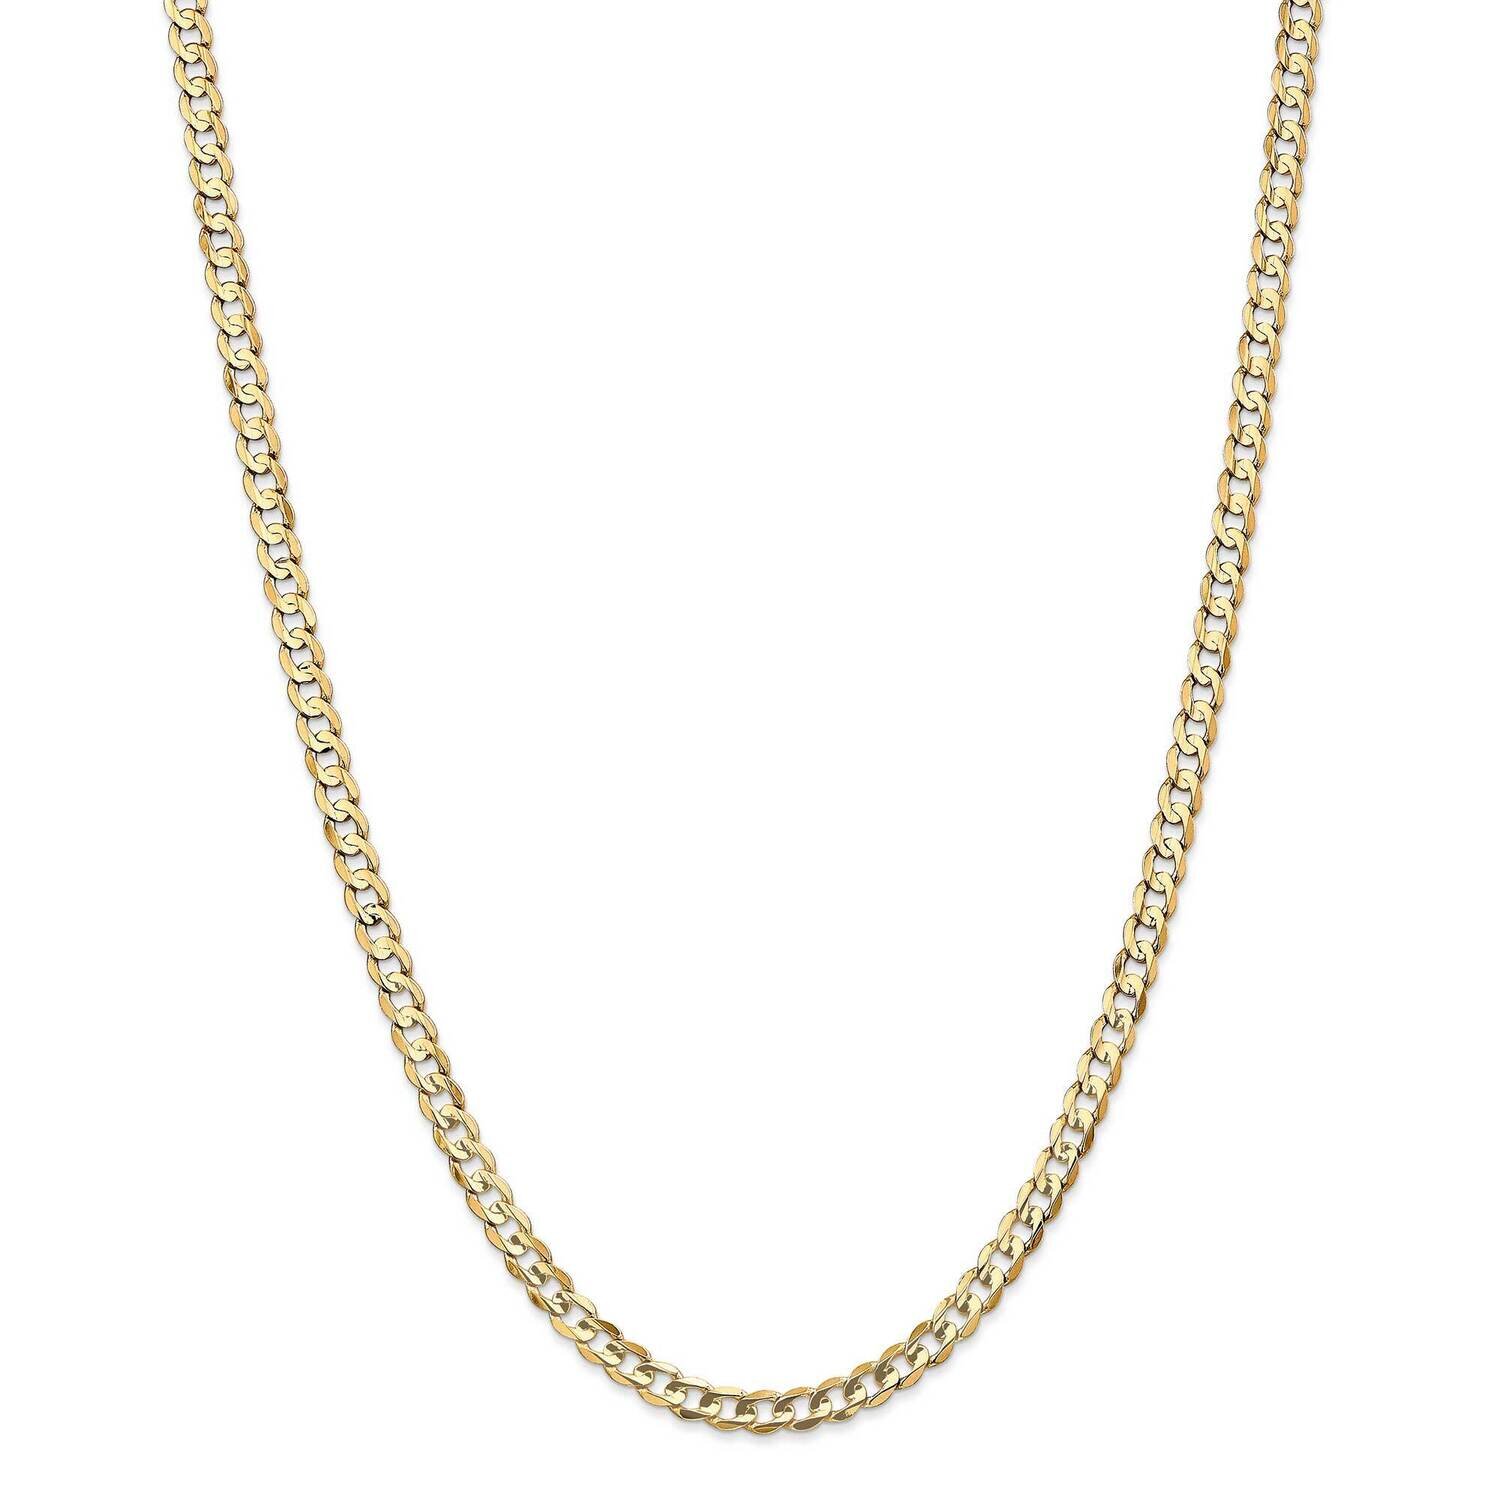 4.5mm Open Concave Curb Chain 28 Inch 14k Gold LCR120-28